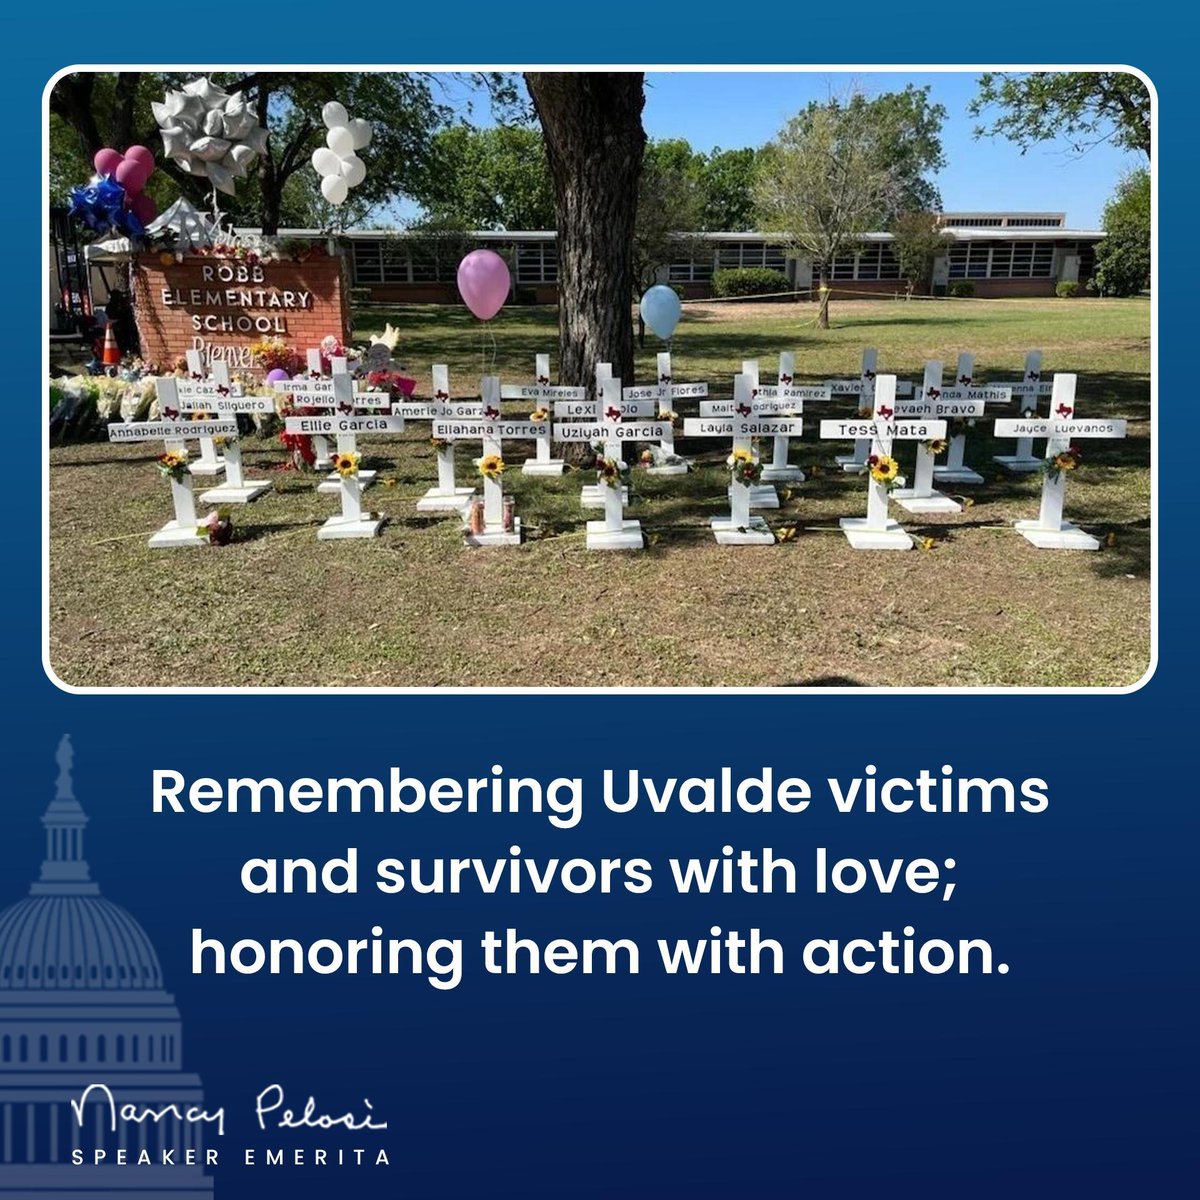 We remember the 19 precious children and 2 teachers murdered two years ago in #Uvalde. We honored victims and survivors by passing the 1st federal gun safety law in 30 years and will do more because no one’s political survival is more important than the survival of our children.